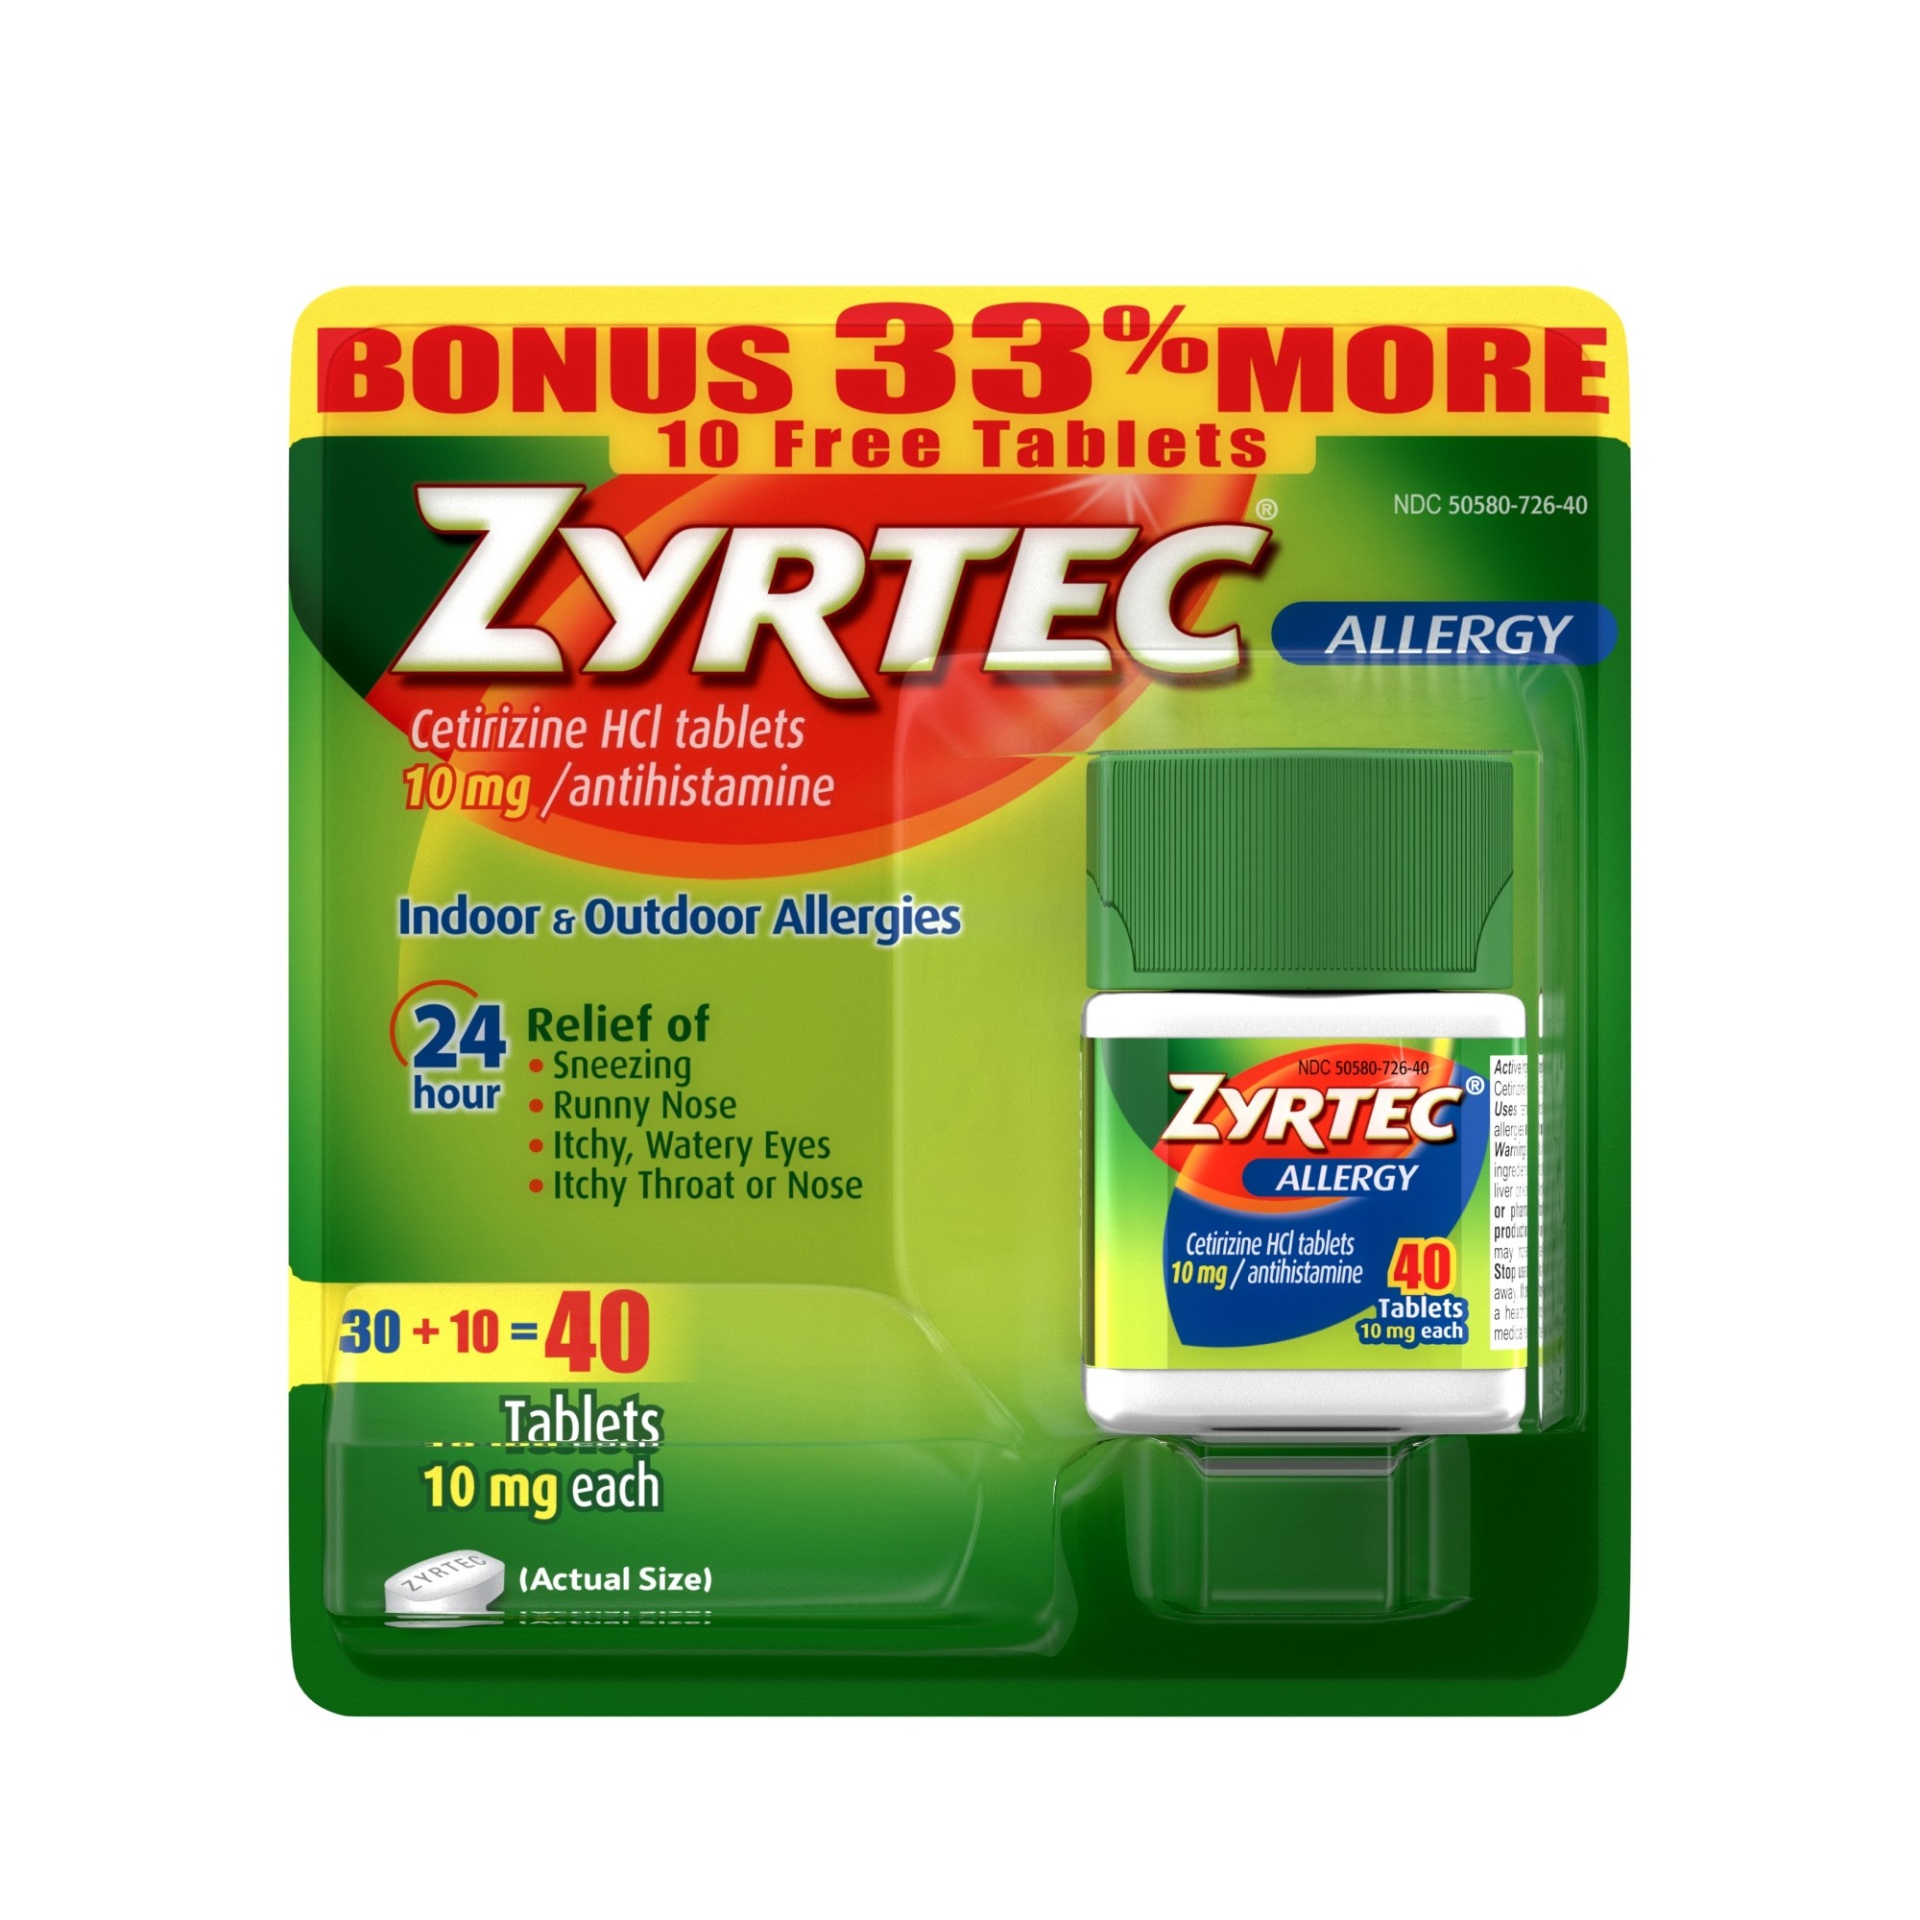 slide 1 of 4, Zyrtec 24 Hour Allergy Relief Tablets, Antihistamine Indoor & Outdoor Allergy Medicine with Cetirizine HCl, Relief from Runny Nose, Sneezing, Itchy Eyes & More, 30 ct